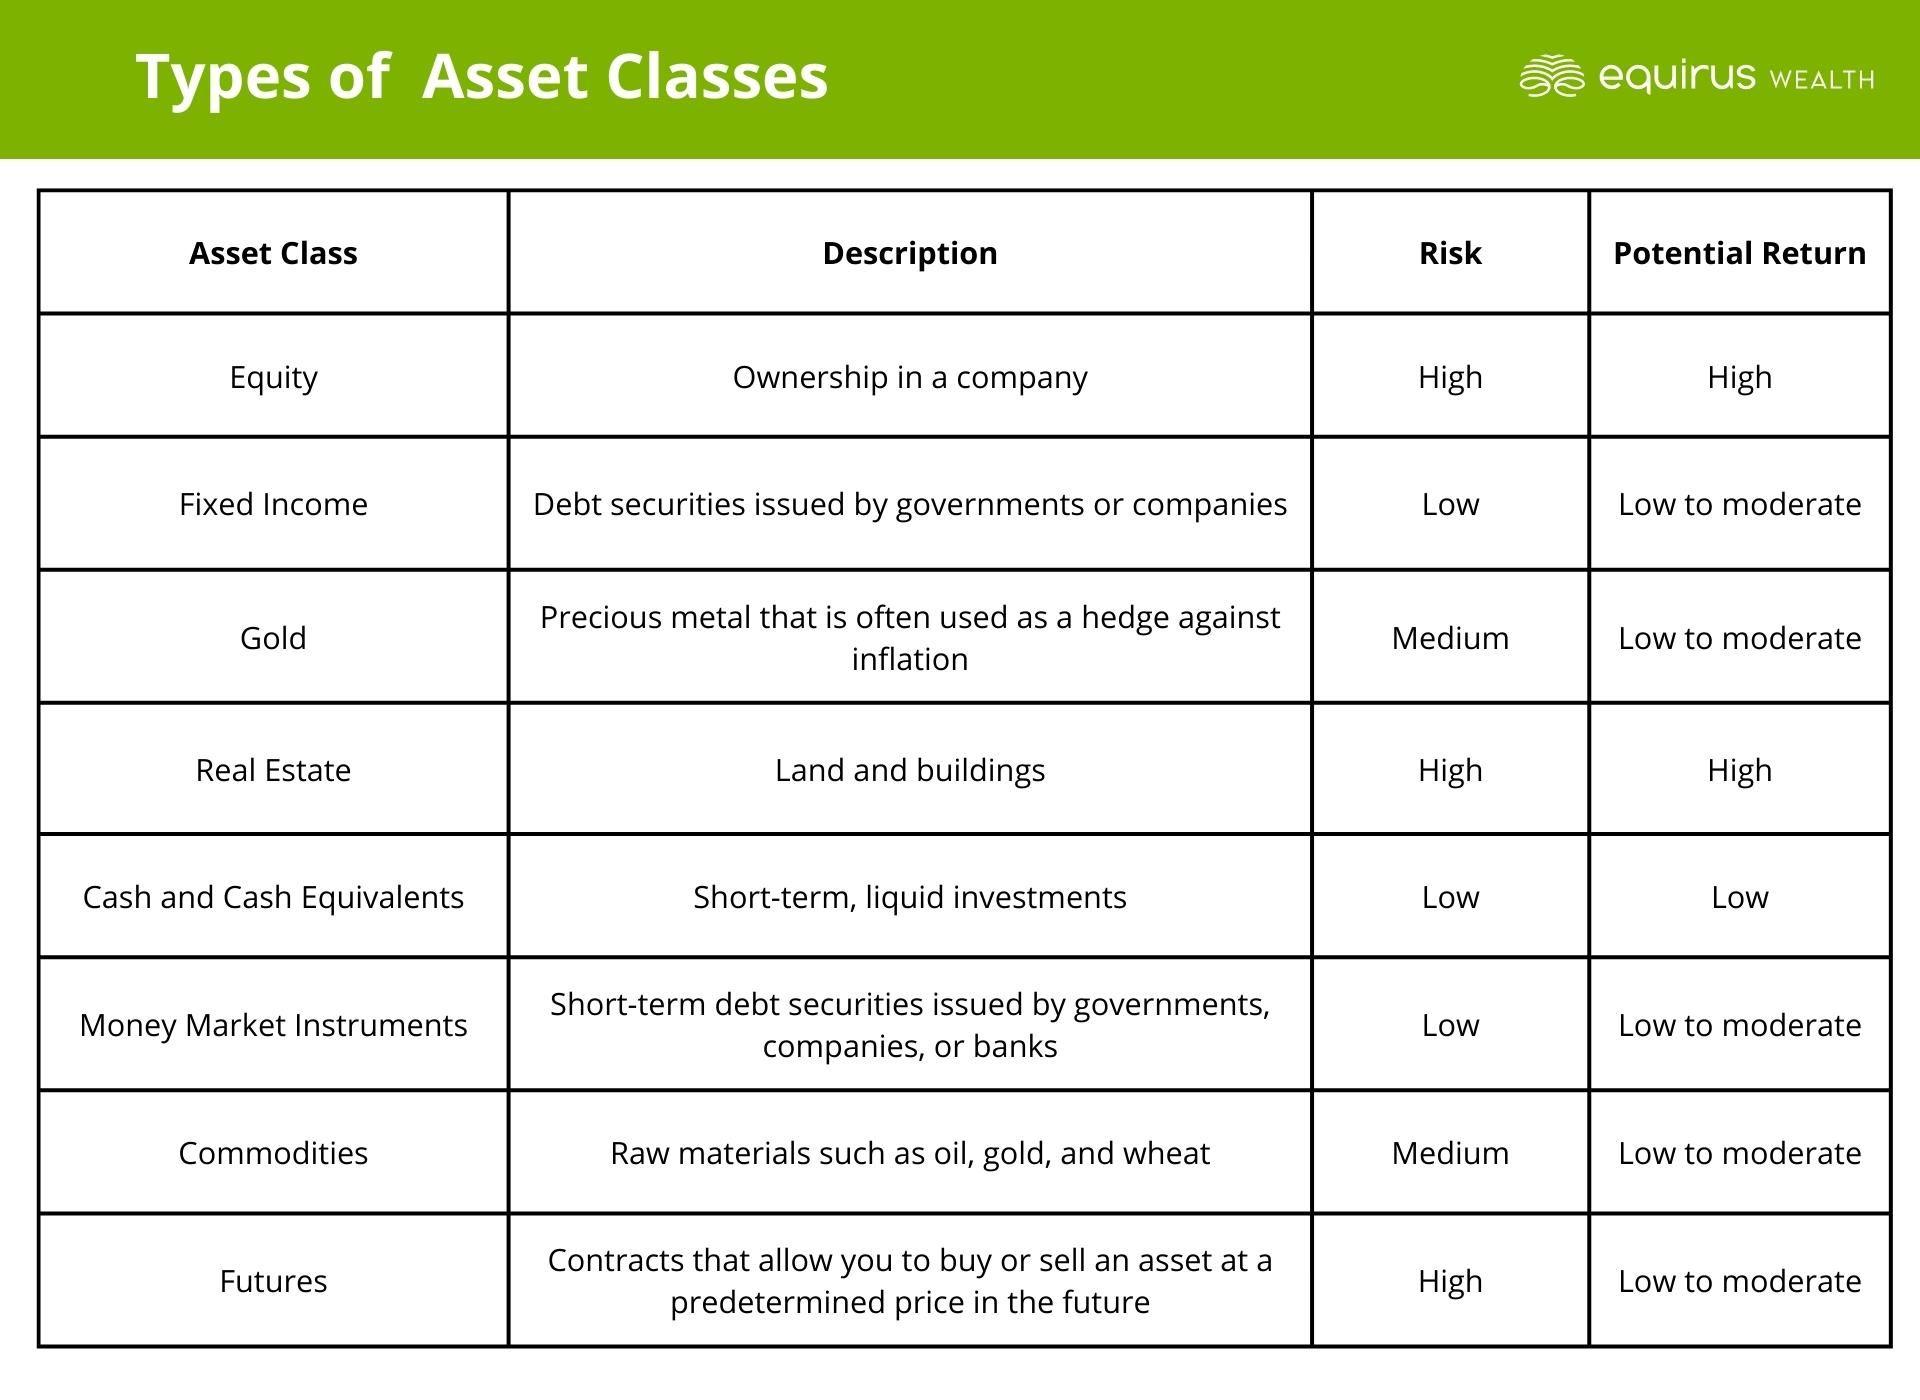 Types of Asset Classes with risk and returns.jpg